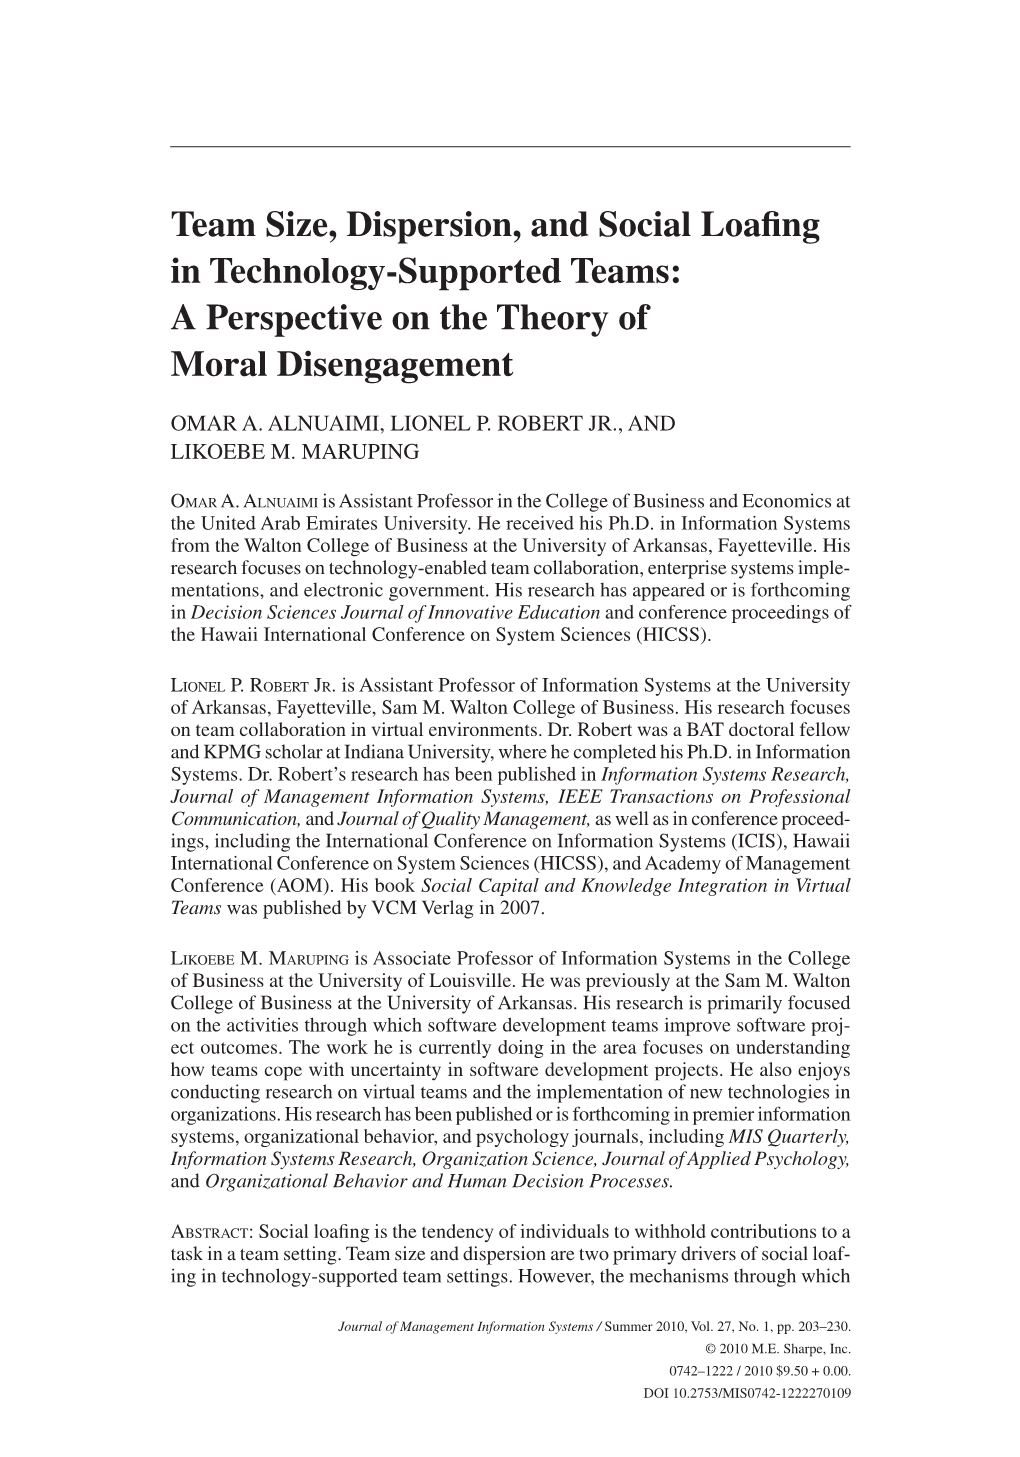 Team Size, Dispersion, and Social Loafing in Technology-Supported Teams: a Perspective on the Theory of Moral Disengagement